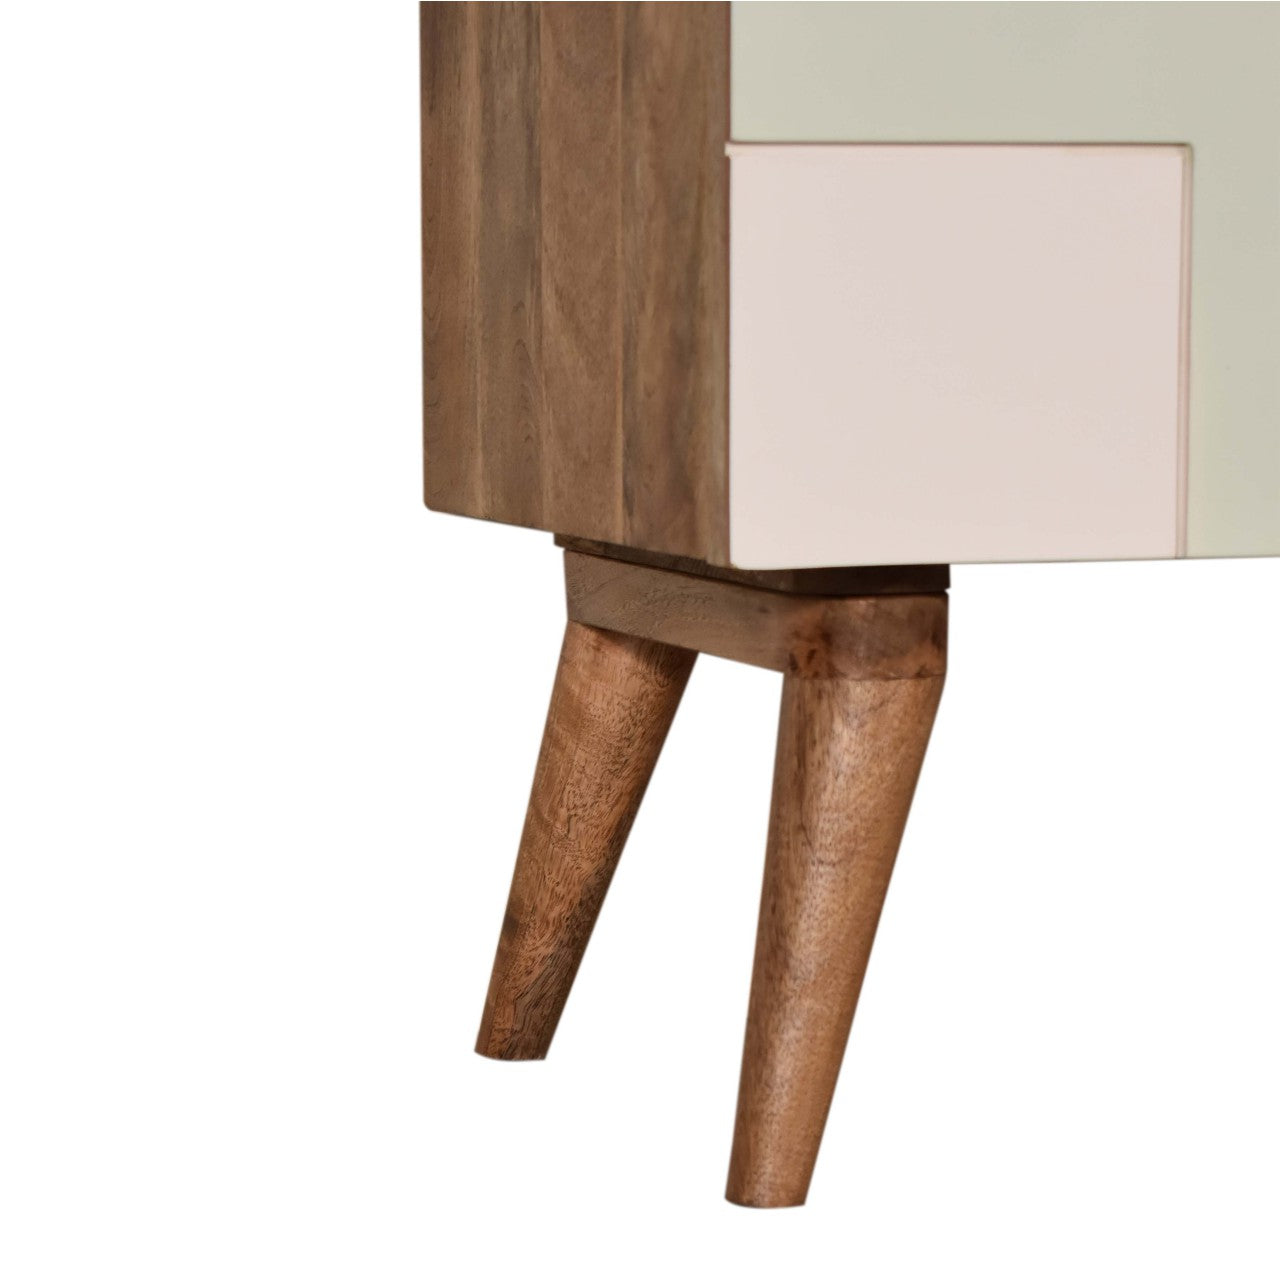 Montcalm Bedside Table, Mango Wood & 3 Green Brown Painted - Broxle